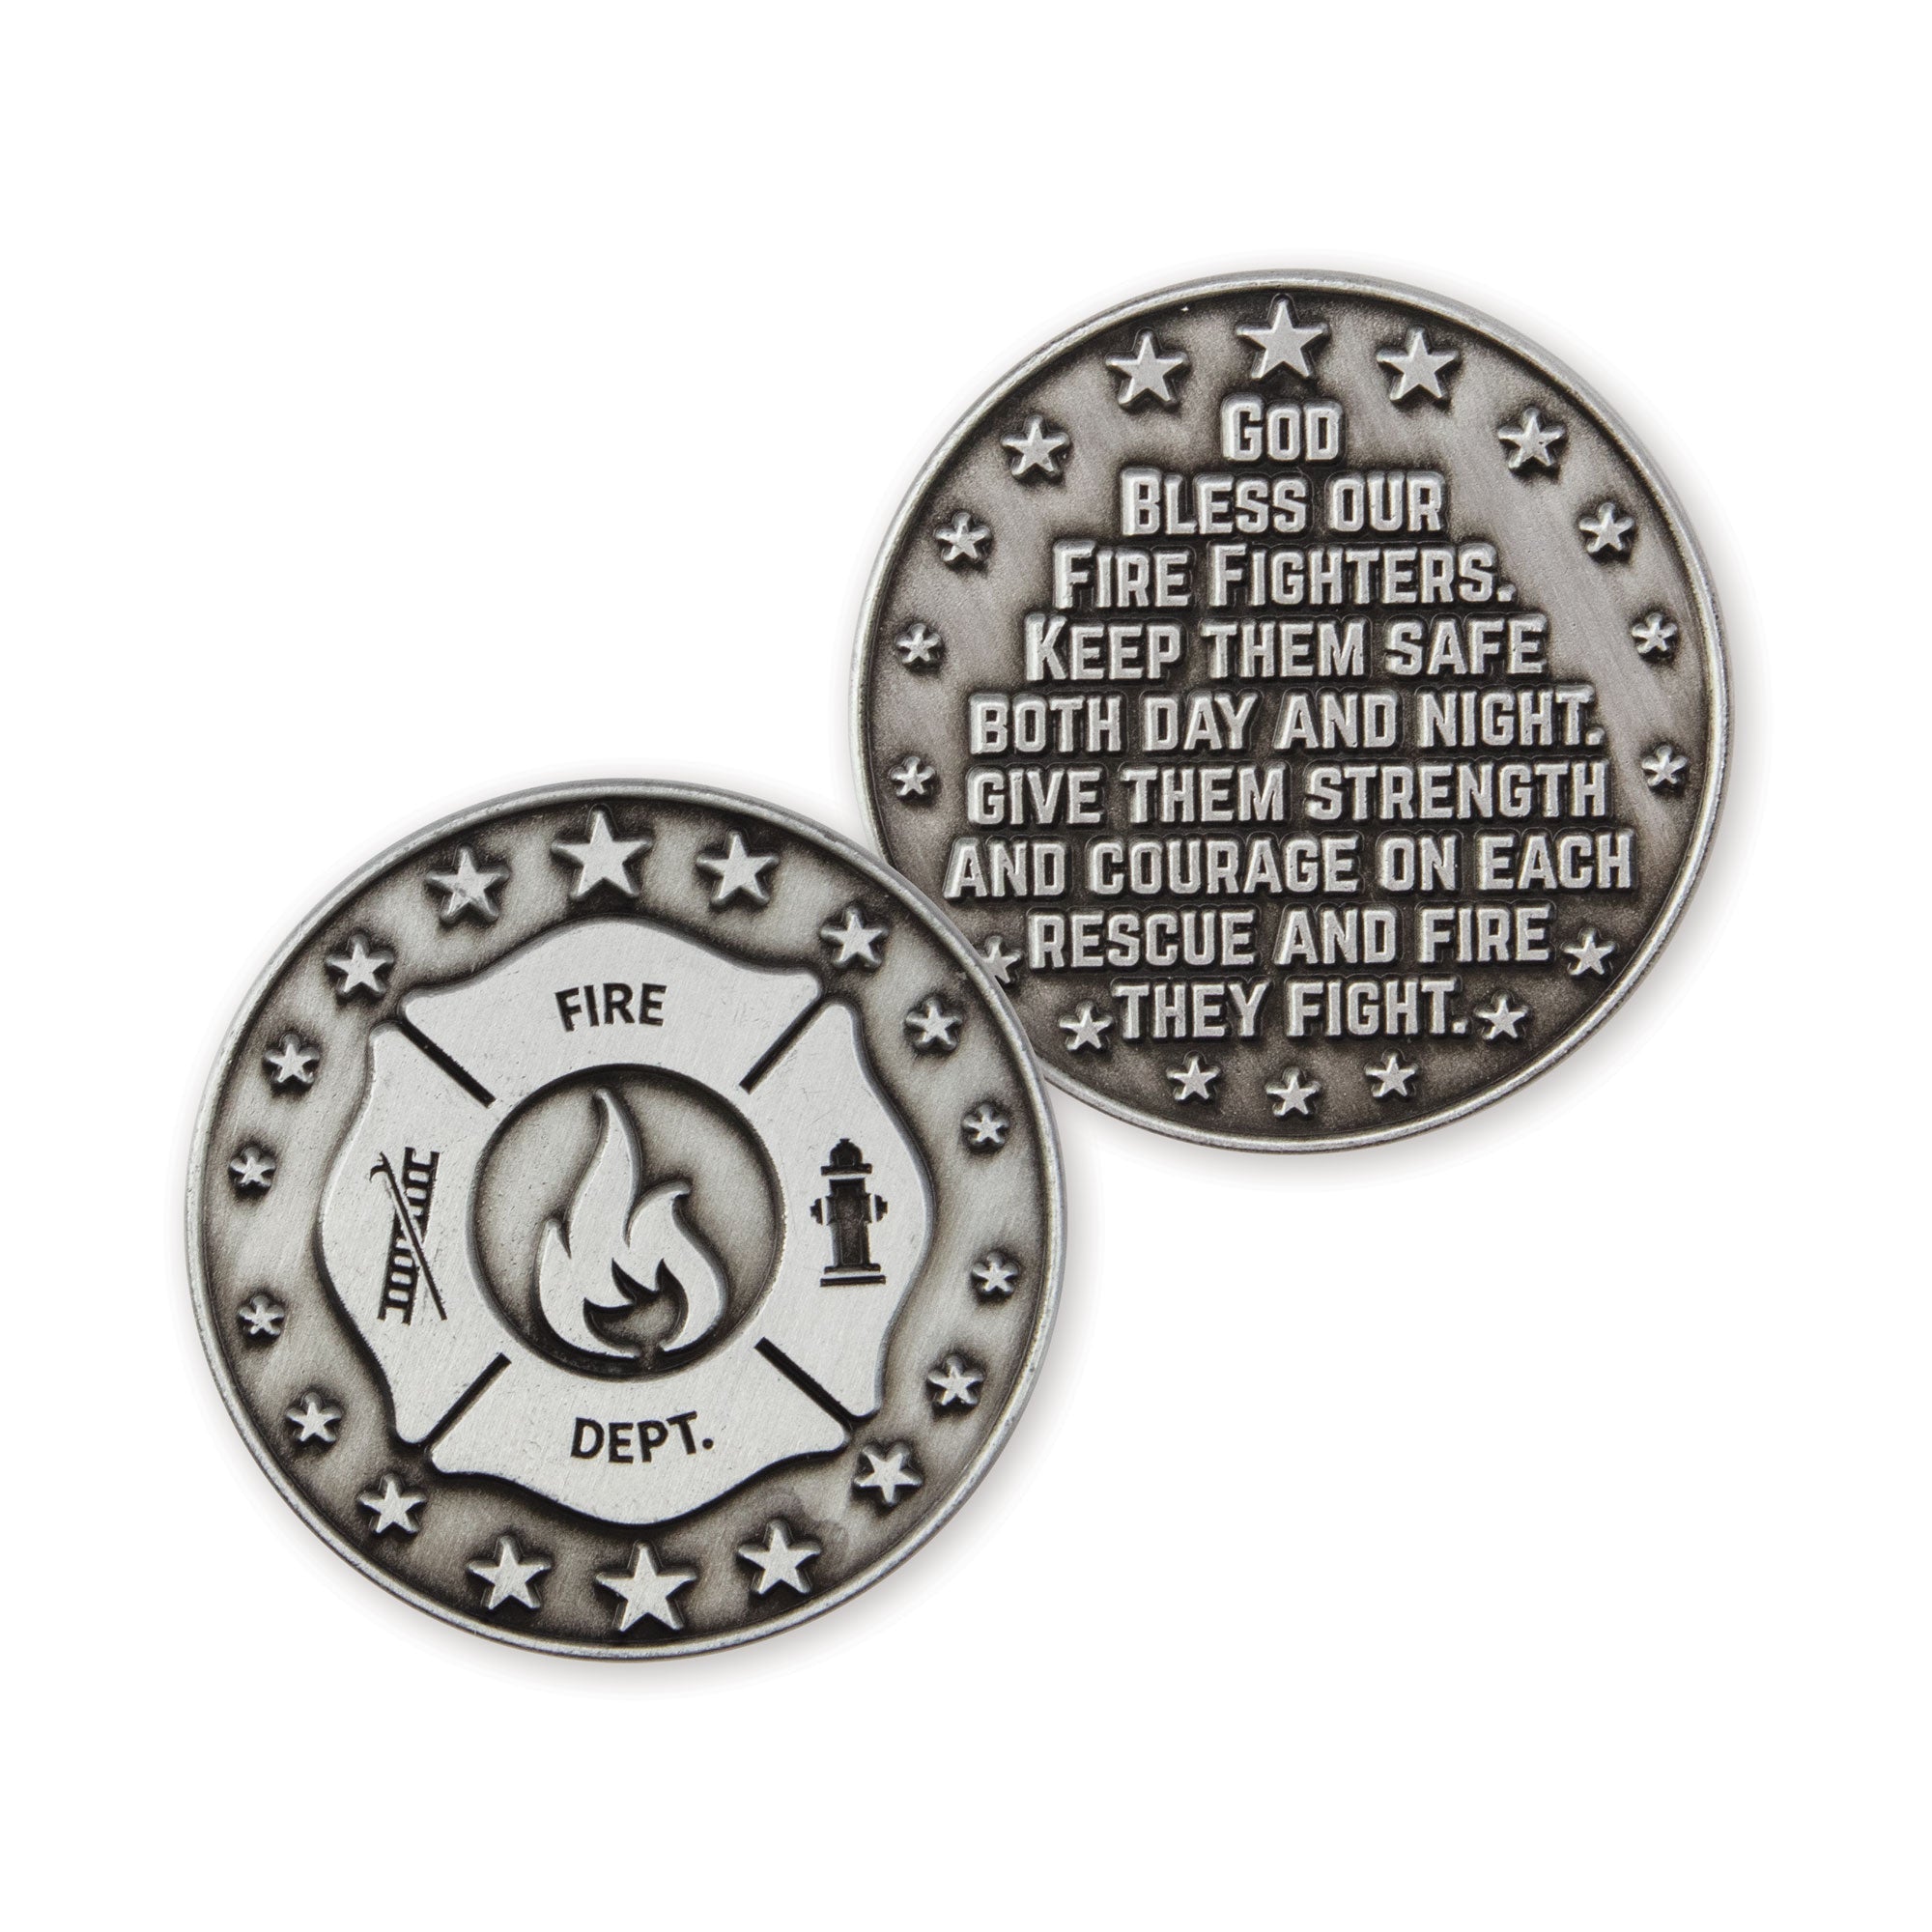 Firefighters Love Expression Coin